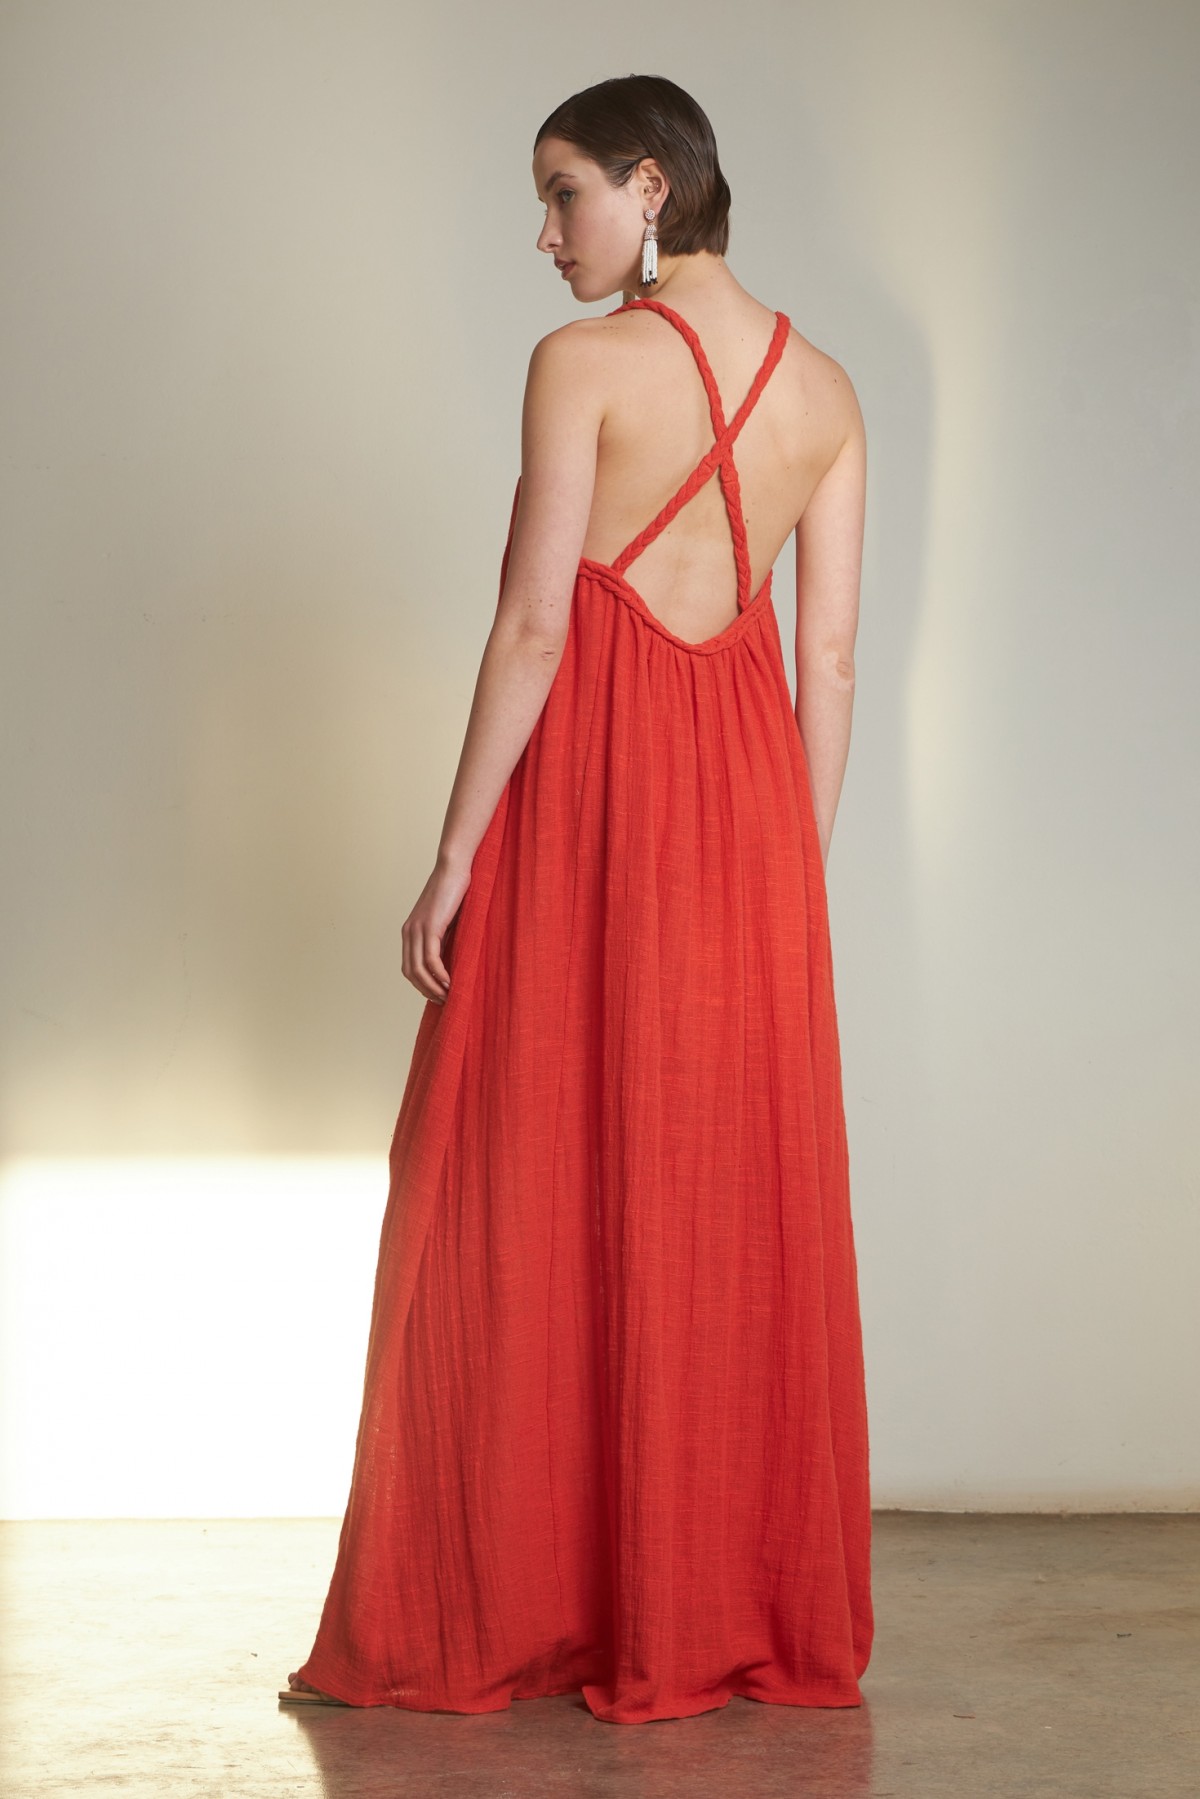 LONG GAUZE BRAIDED DRESS IN CORAL RED